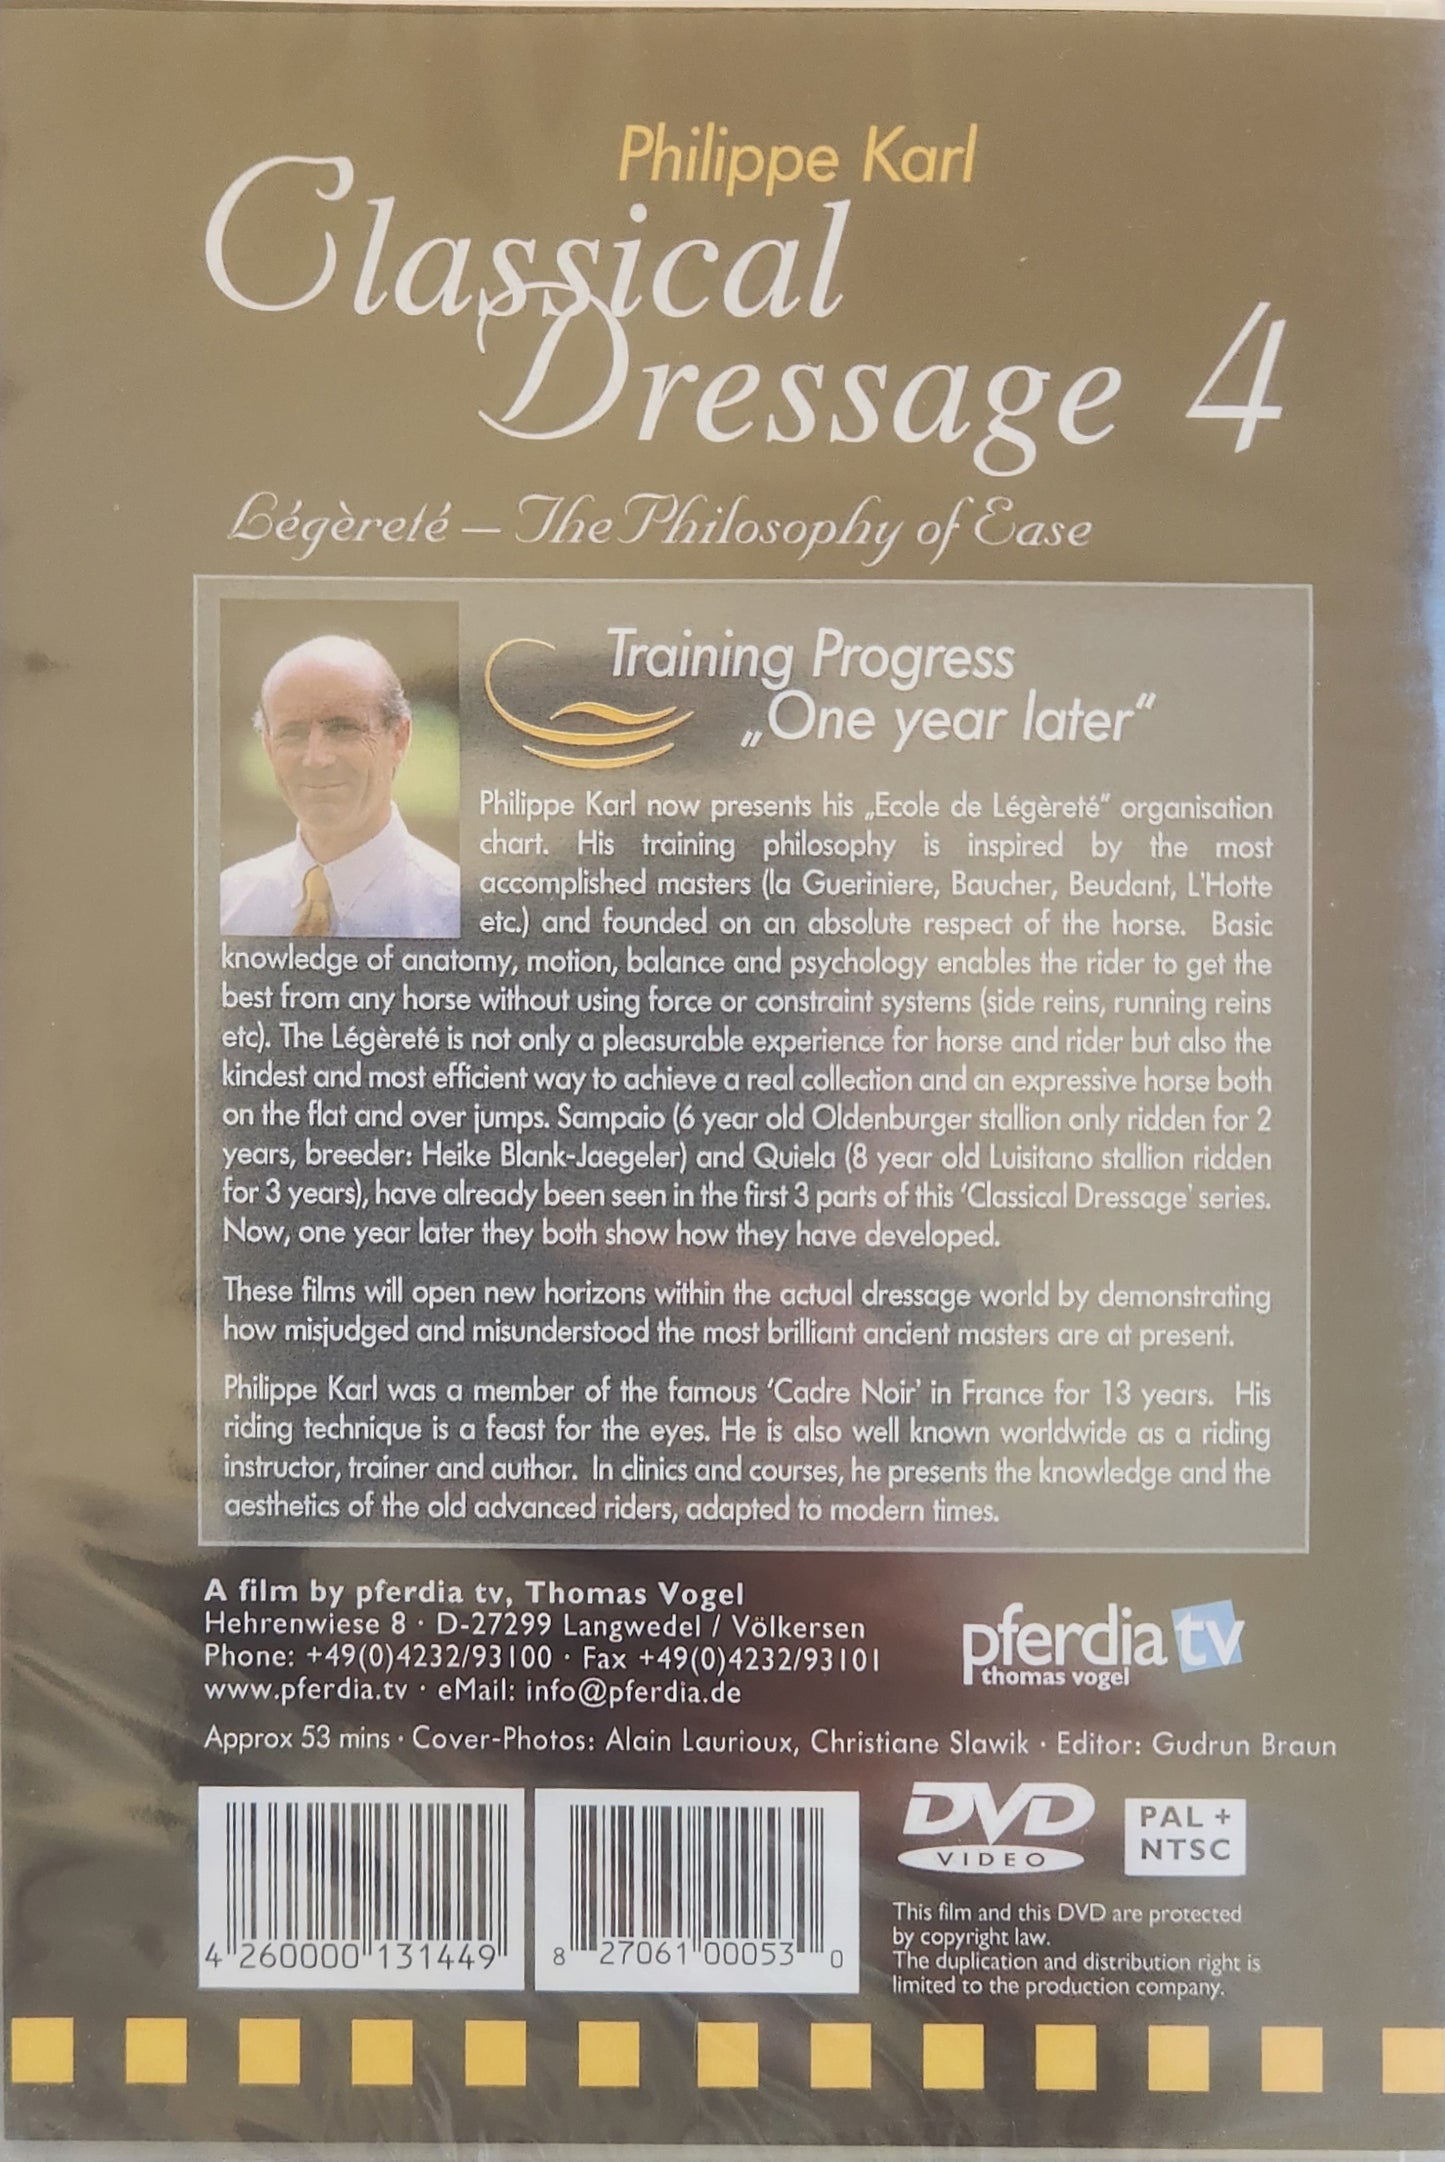 Classical Dressage vol. 4 Training Progress - "one year later" (DVD)